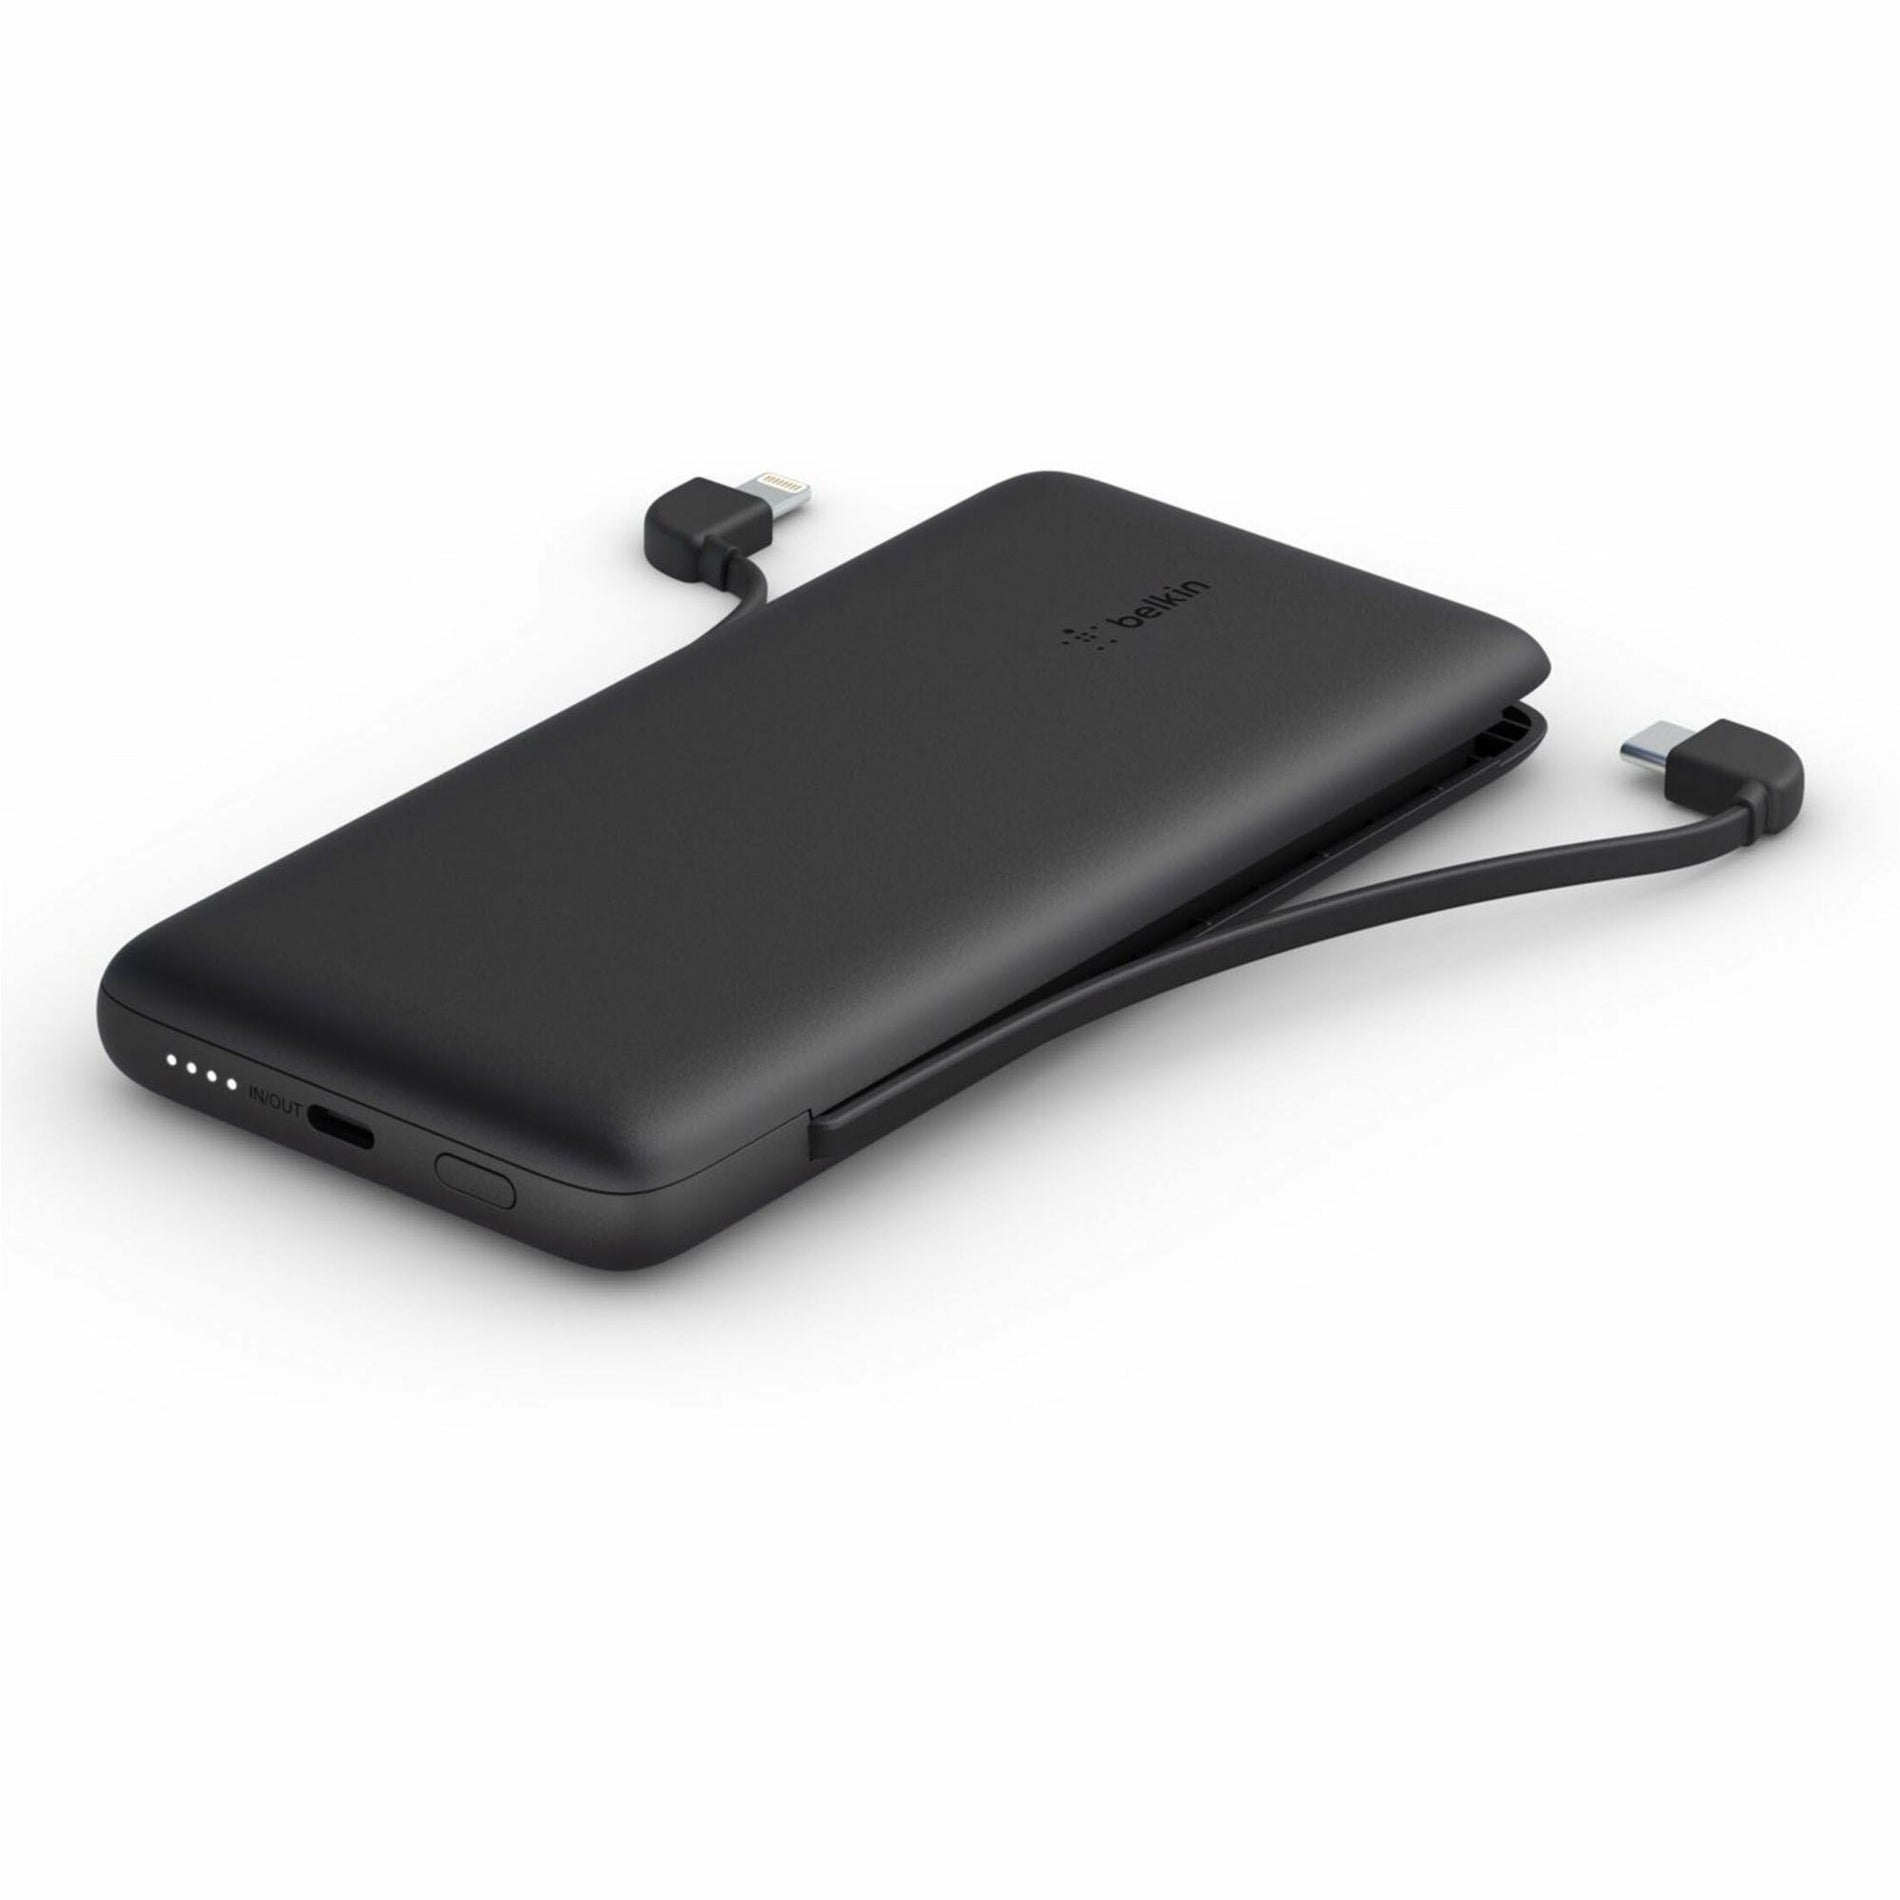 Belkin BPB006BTBLK Power Bank, Portable Charger for On-the-Go Charging